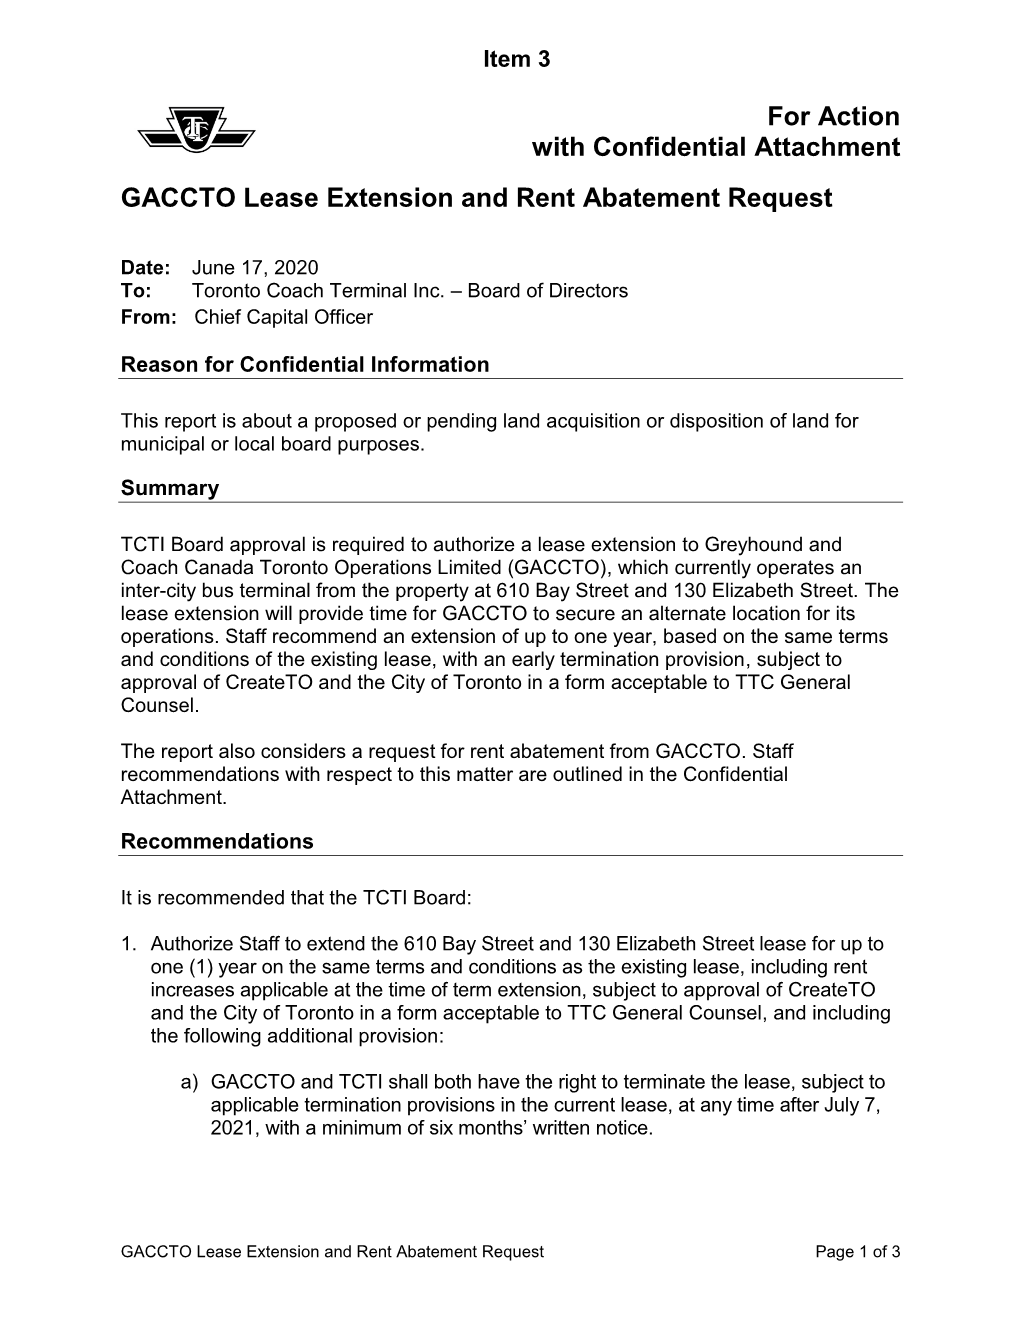 GACCTO Lease Extension and Rent Abatement Request